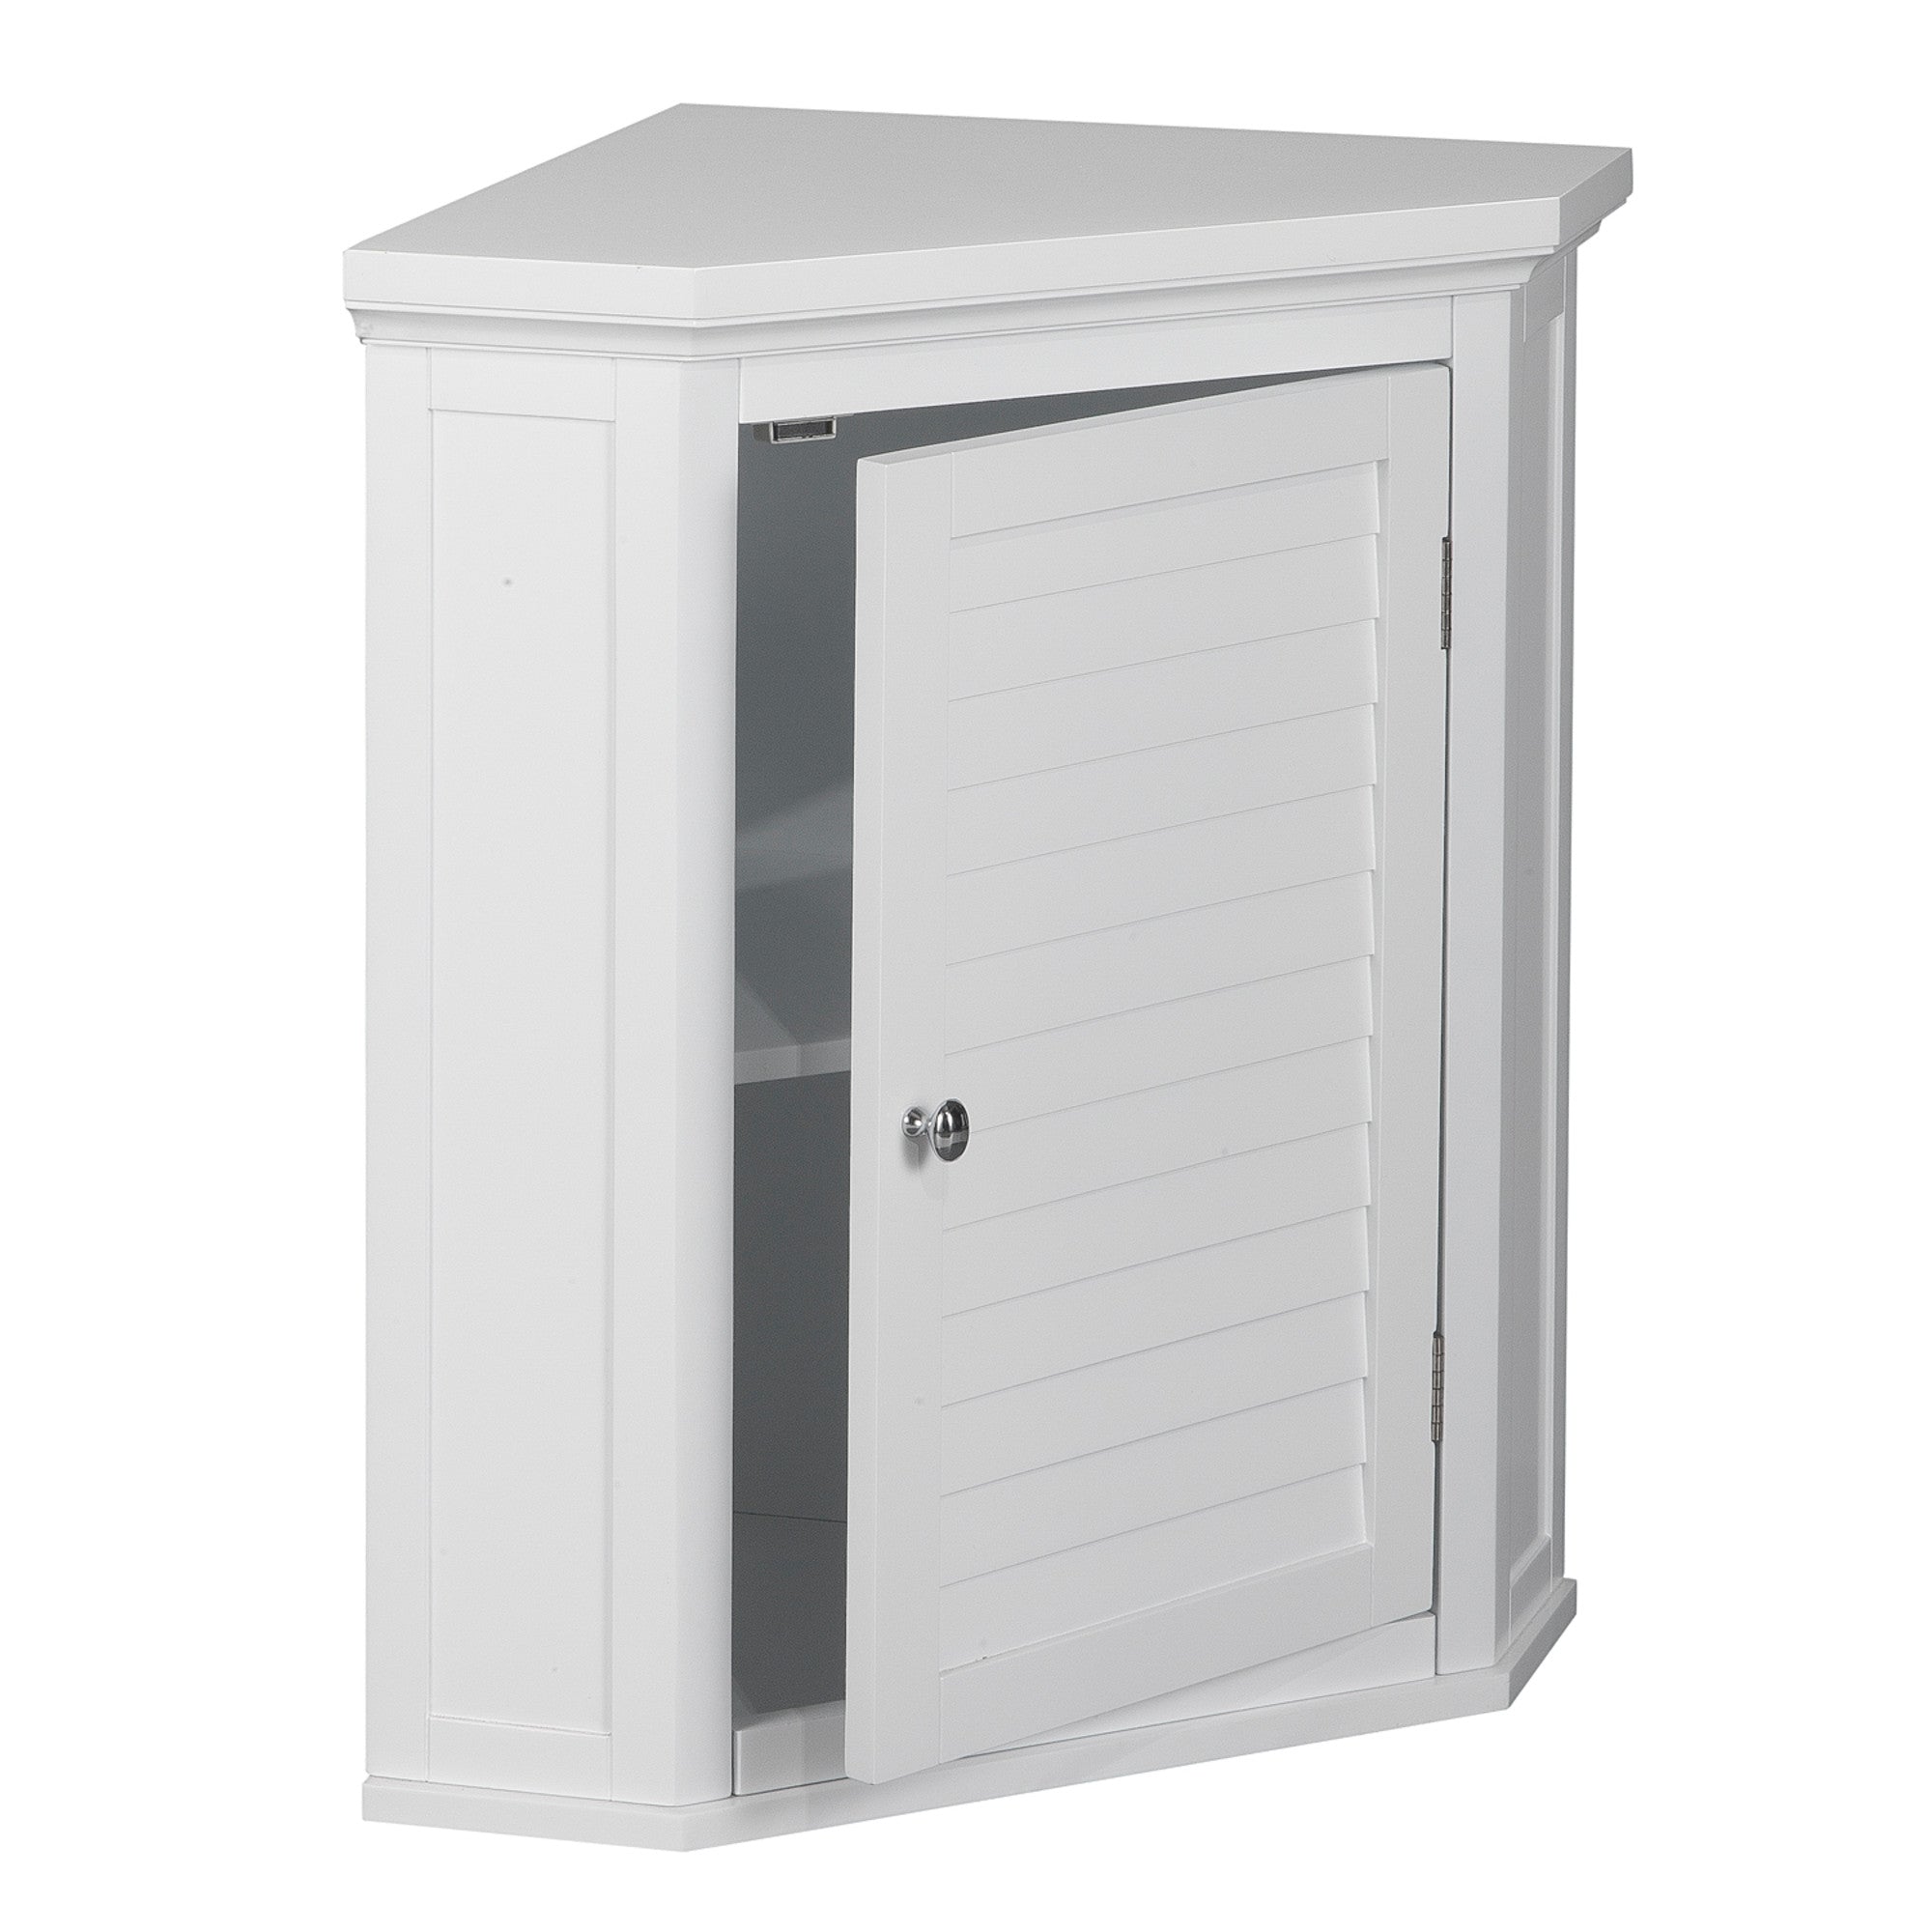 Elegant Home Fashions Glancy One Shutter Door Removable Wooden Corner Wall Cabinet White